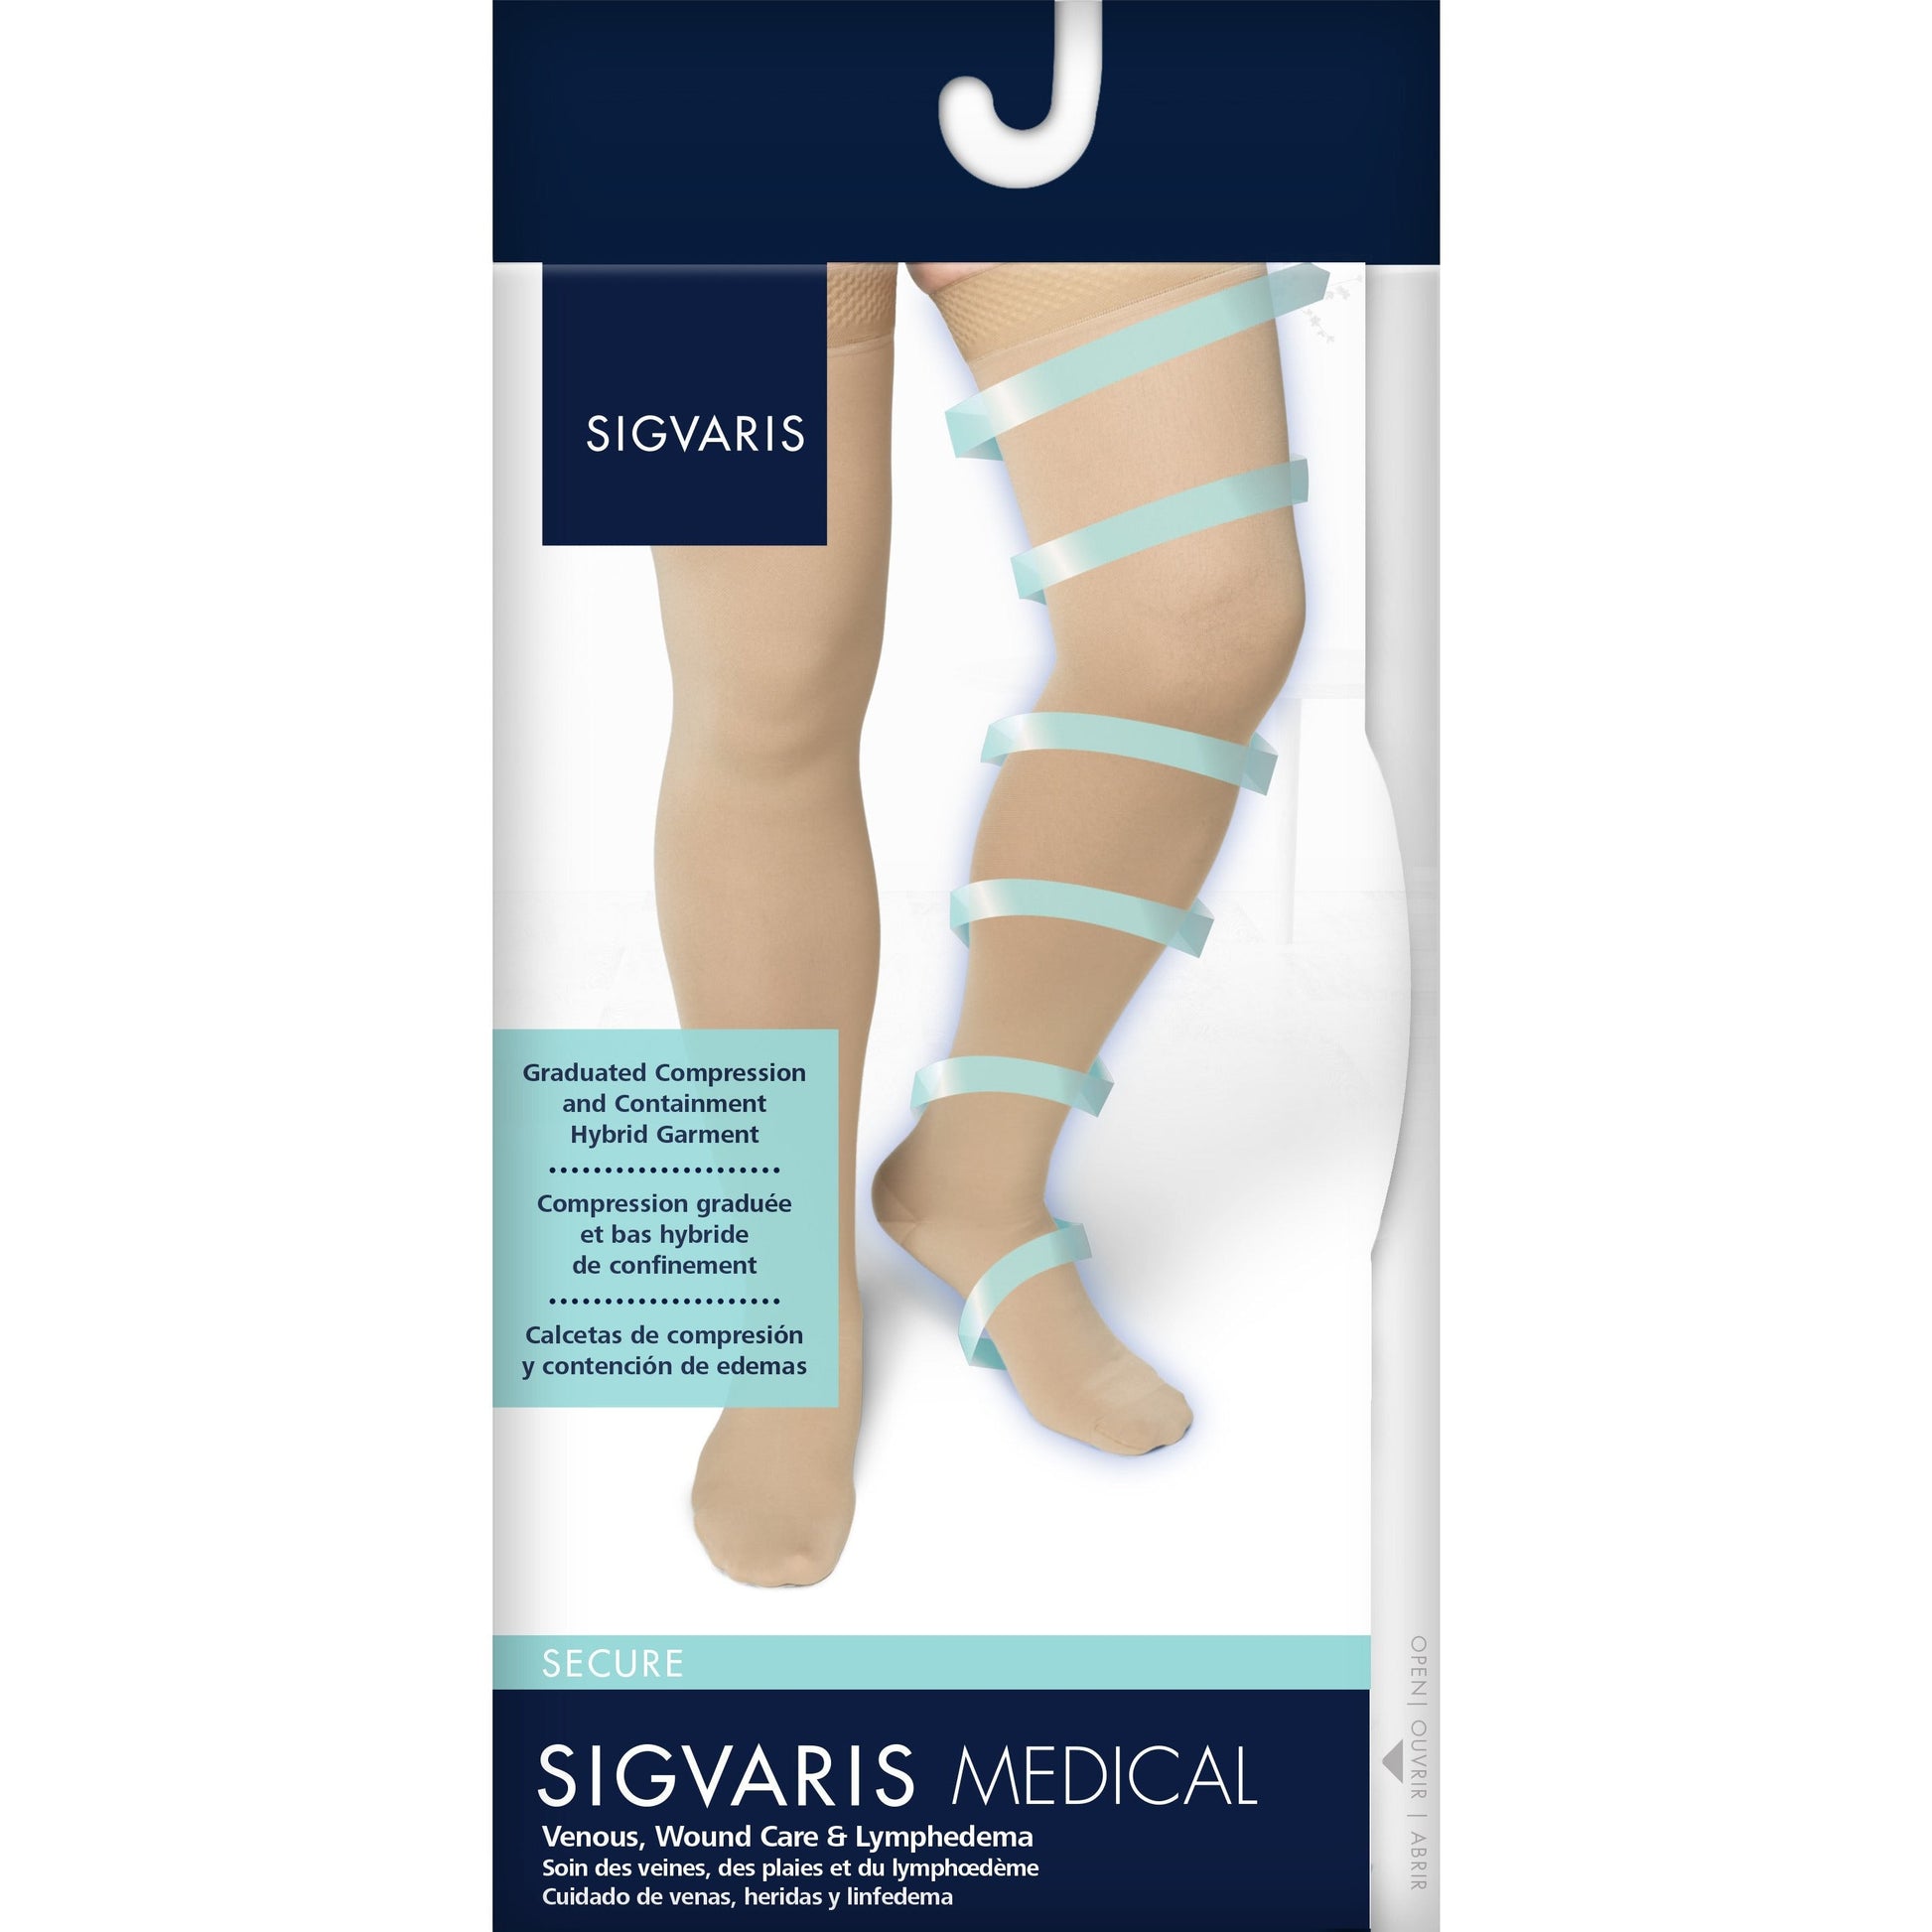 Compression Stockings Thigh High for Women Men 20-30 mmhg Graduated  Compression Socks Open Toe Compression